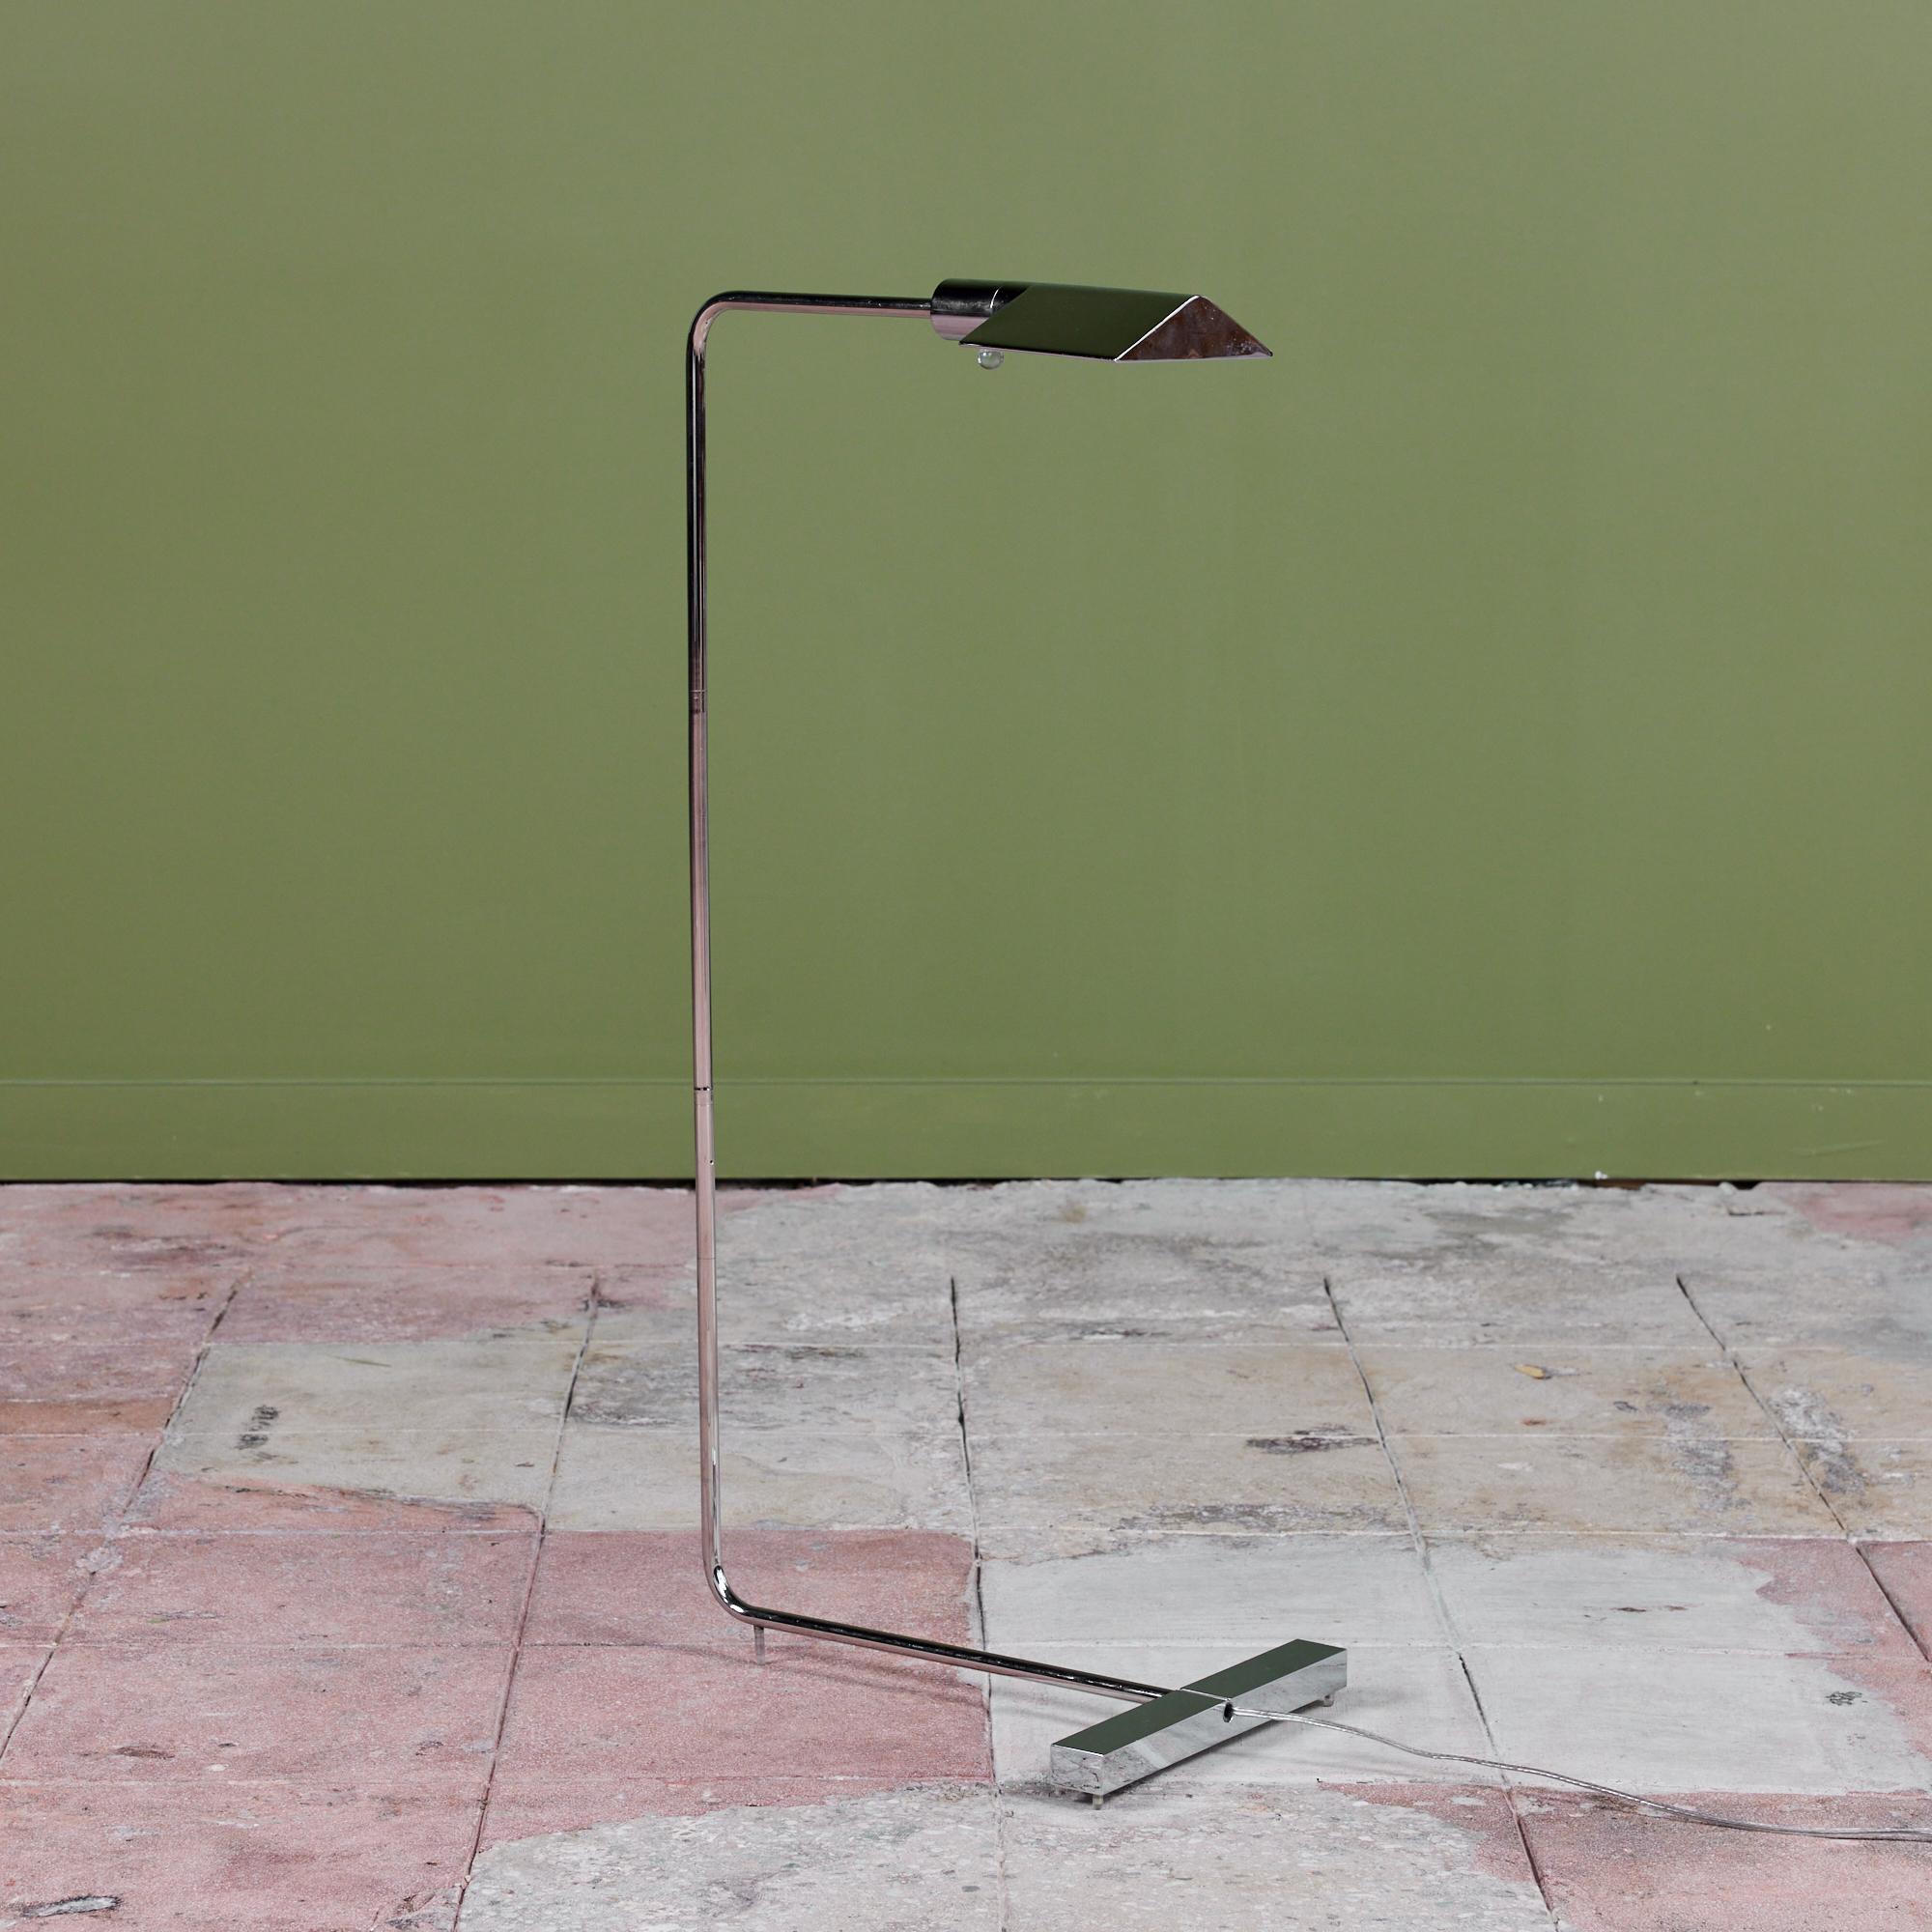 Designed in the 1970s, this stainless steel floor lamp by Cedric Hartman is an enduring design classic. The modernist floor lamp features a triangular stainless steel shade attached to a curved stainless steel stem that offer focused task lighting.